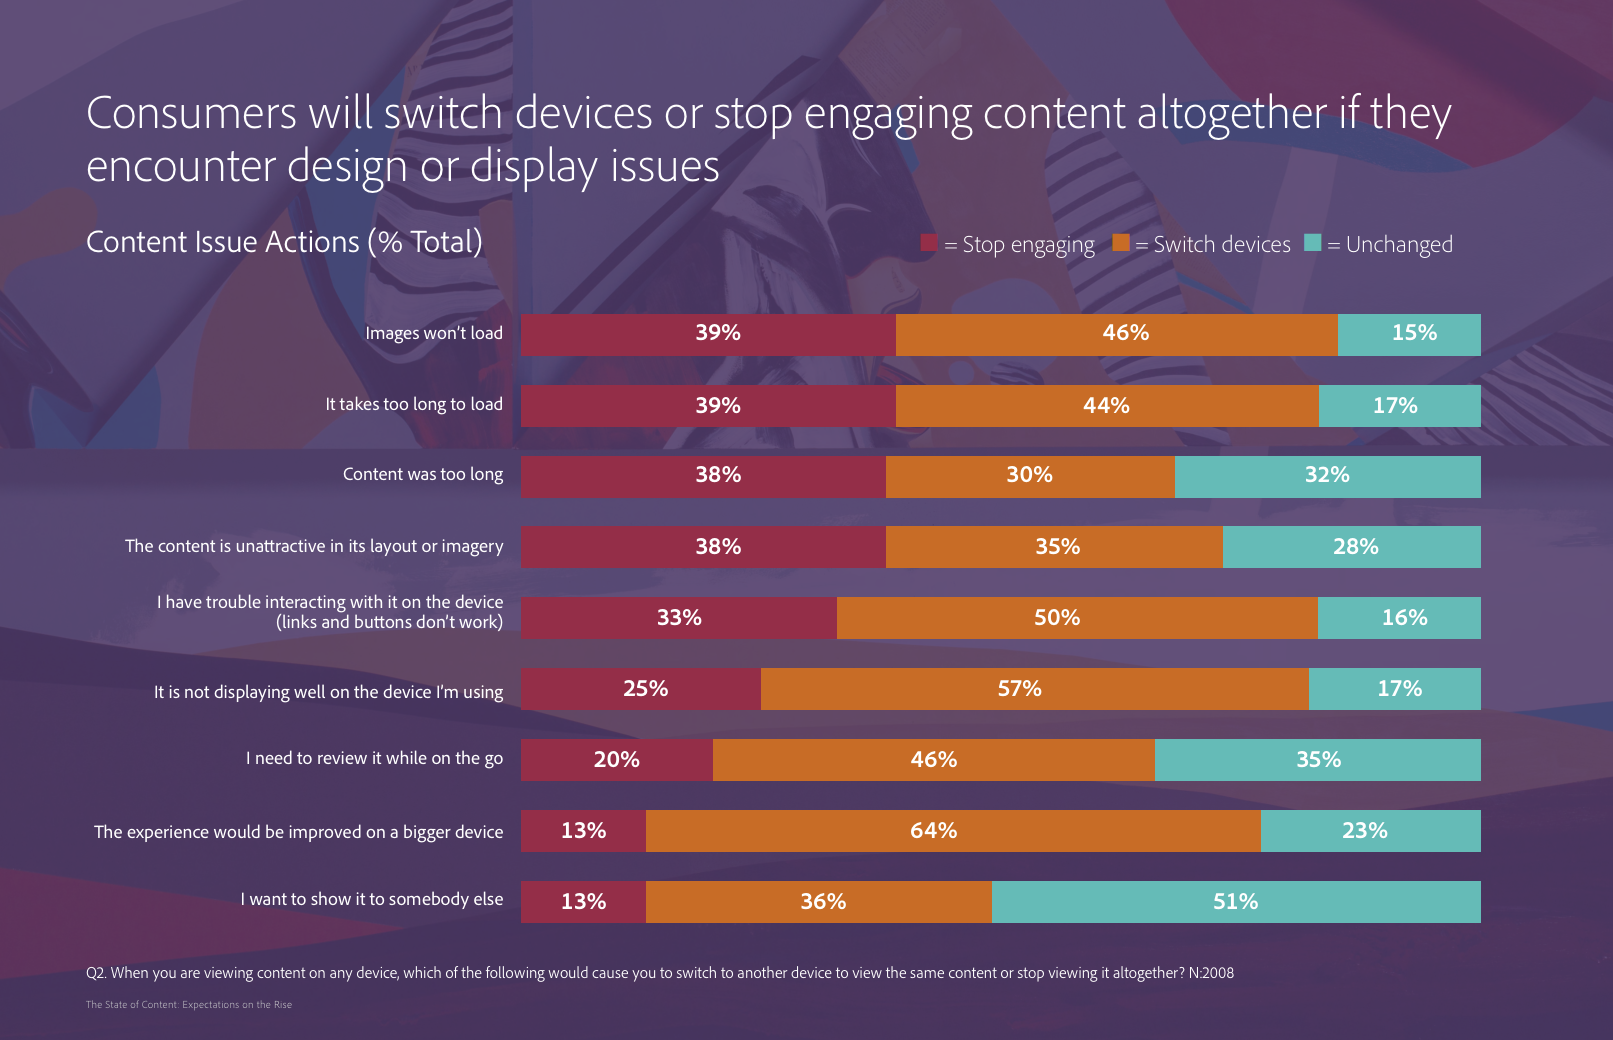 Consumer Response To Design Issues Adobe